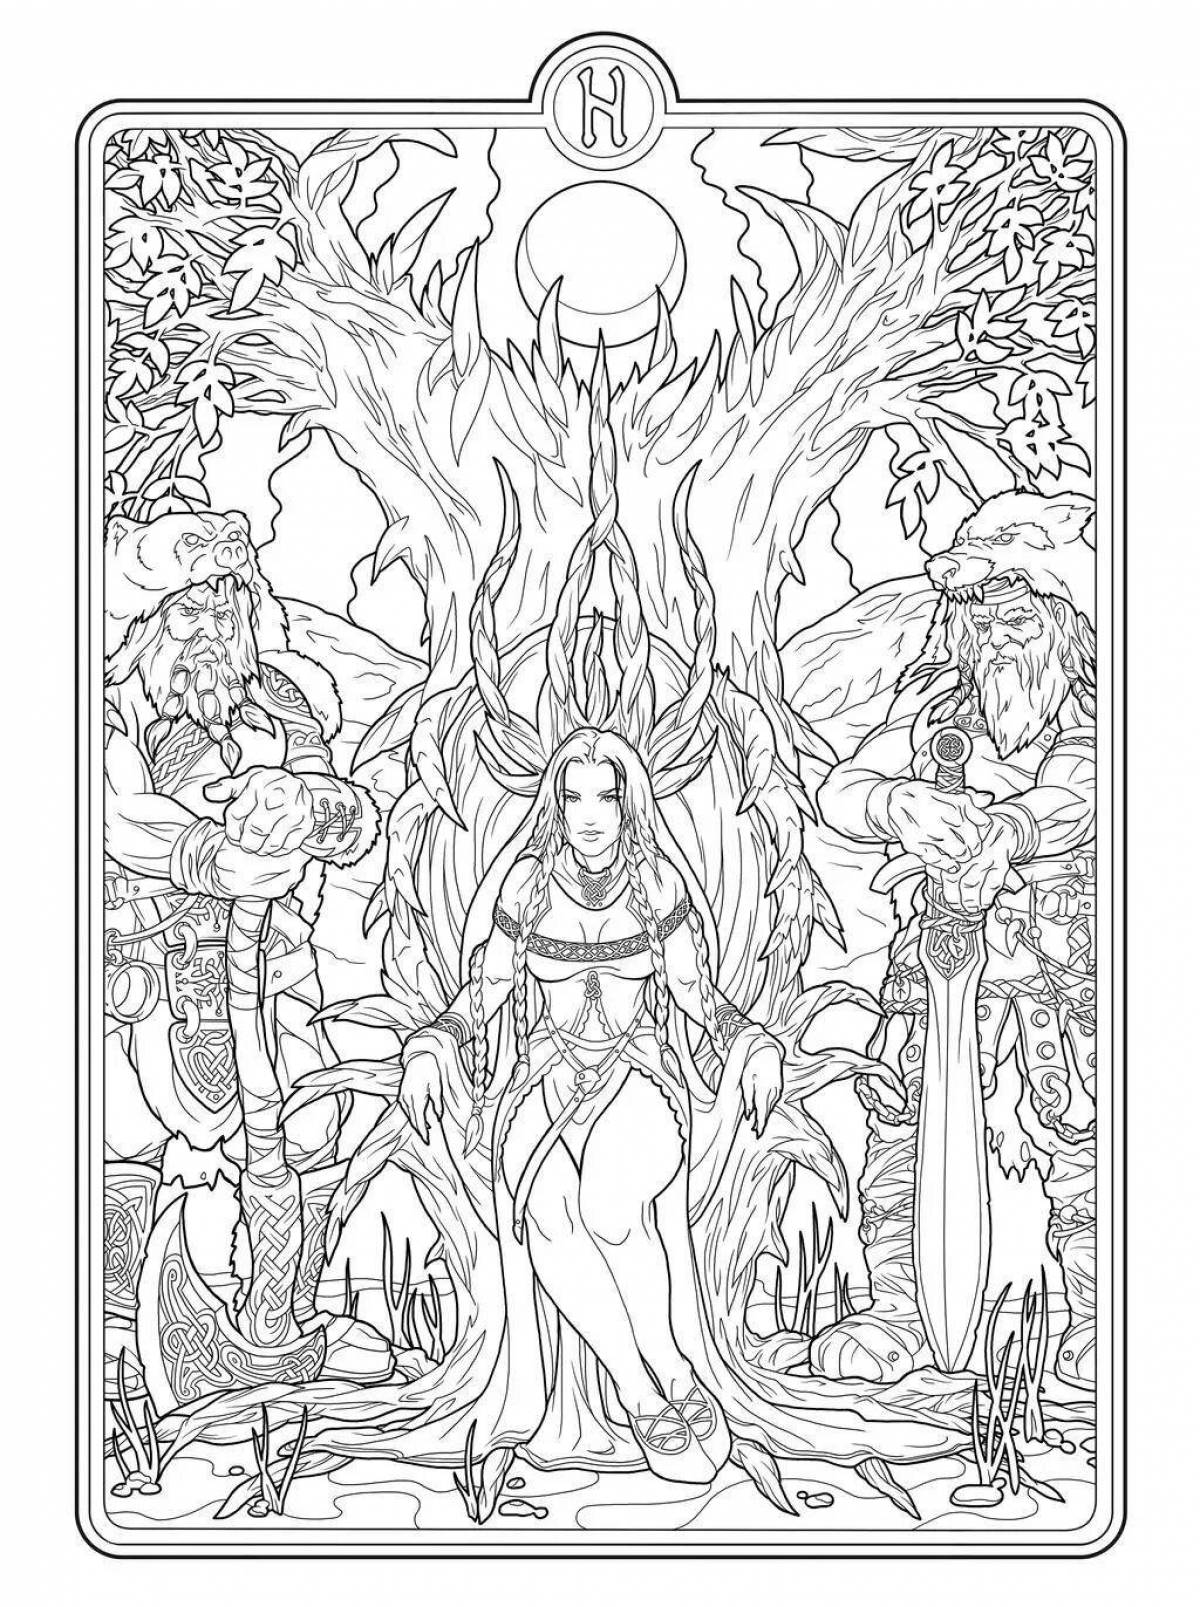 Intriguing coloring book of a witch from Slavic myths